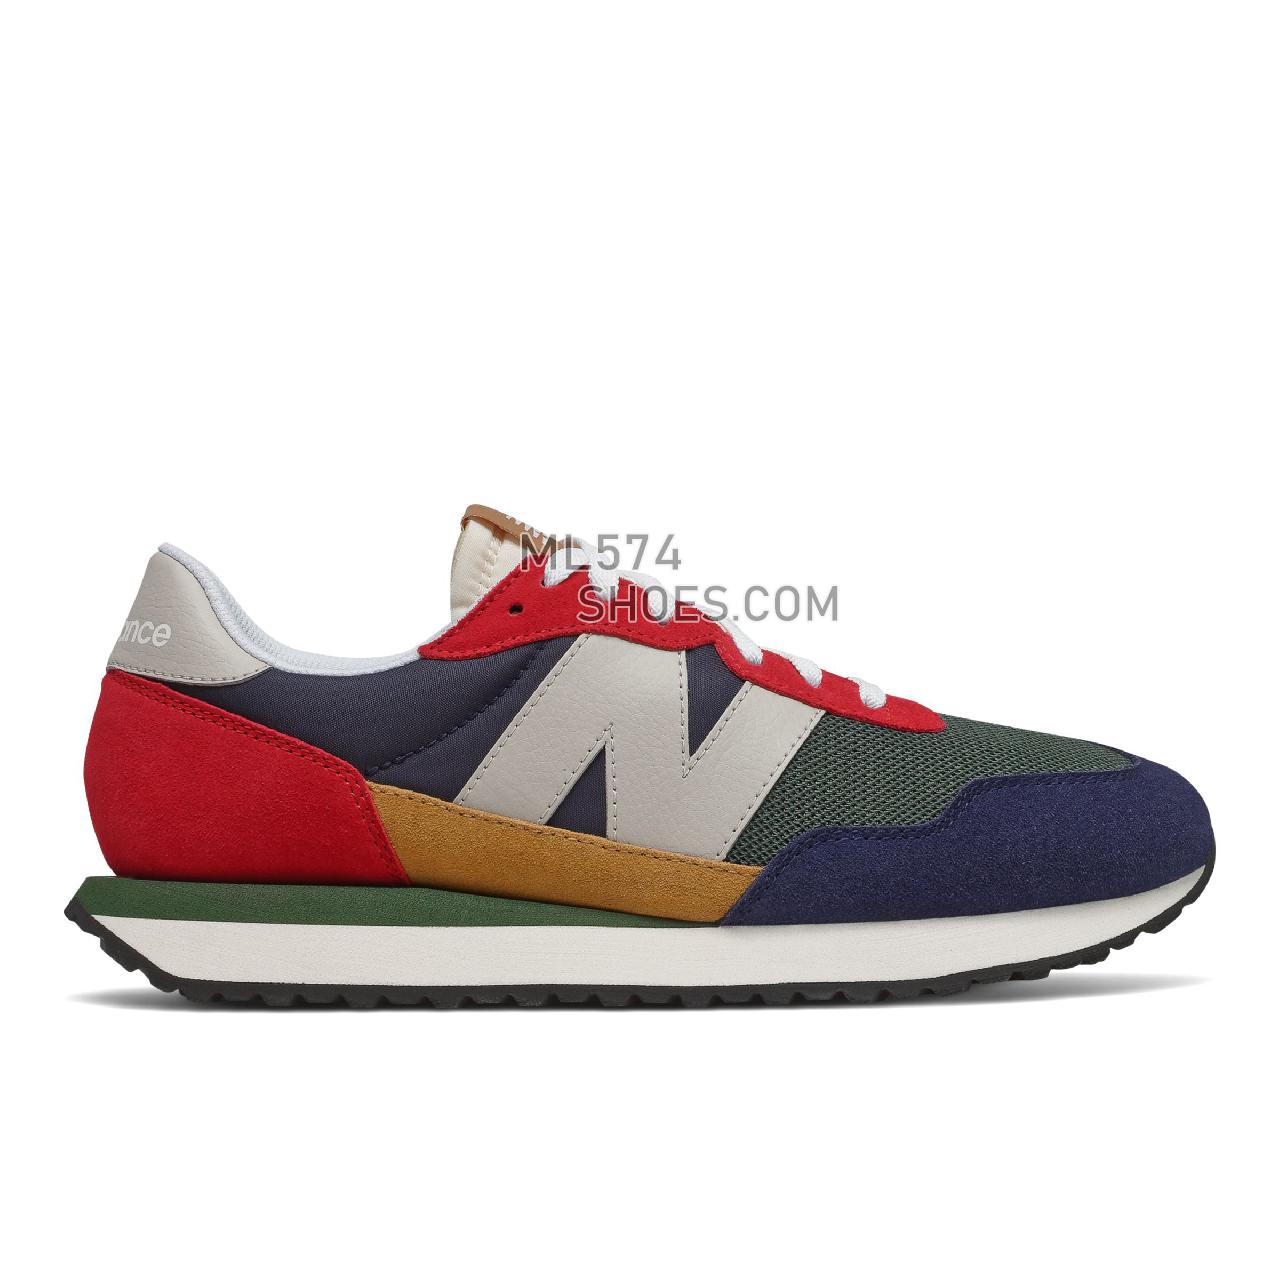 New Balance 237 - Men's Classic Sneakers - Team Red with Pigment - MS237LA1